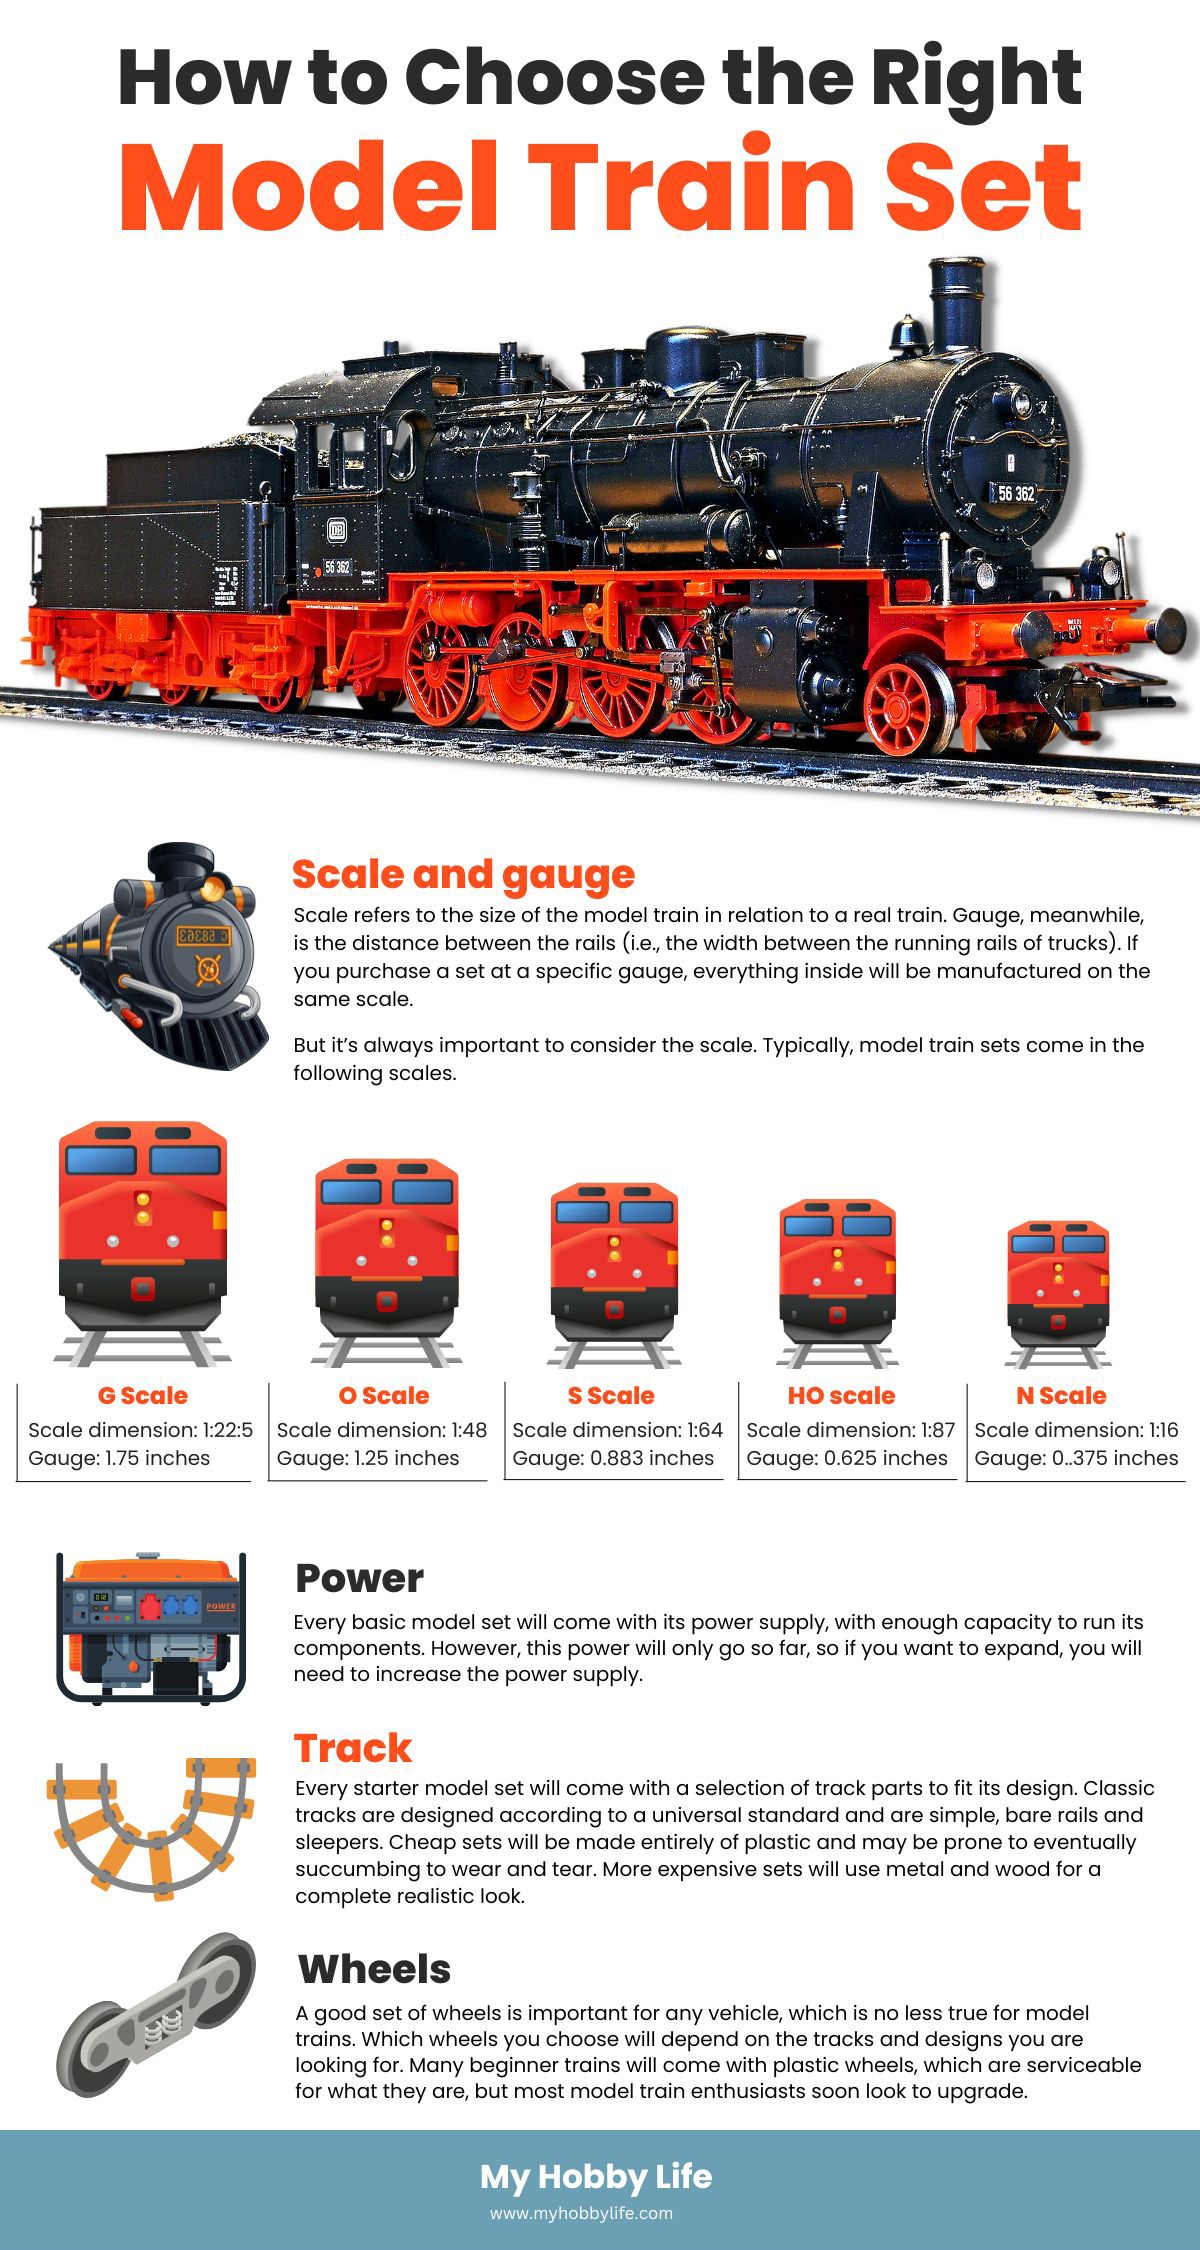  How to Choose the Right Model Train Set